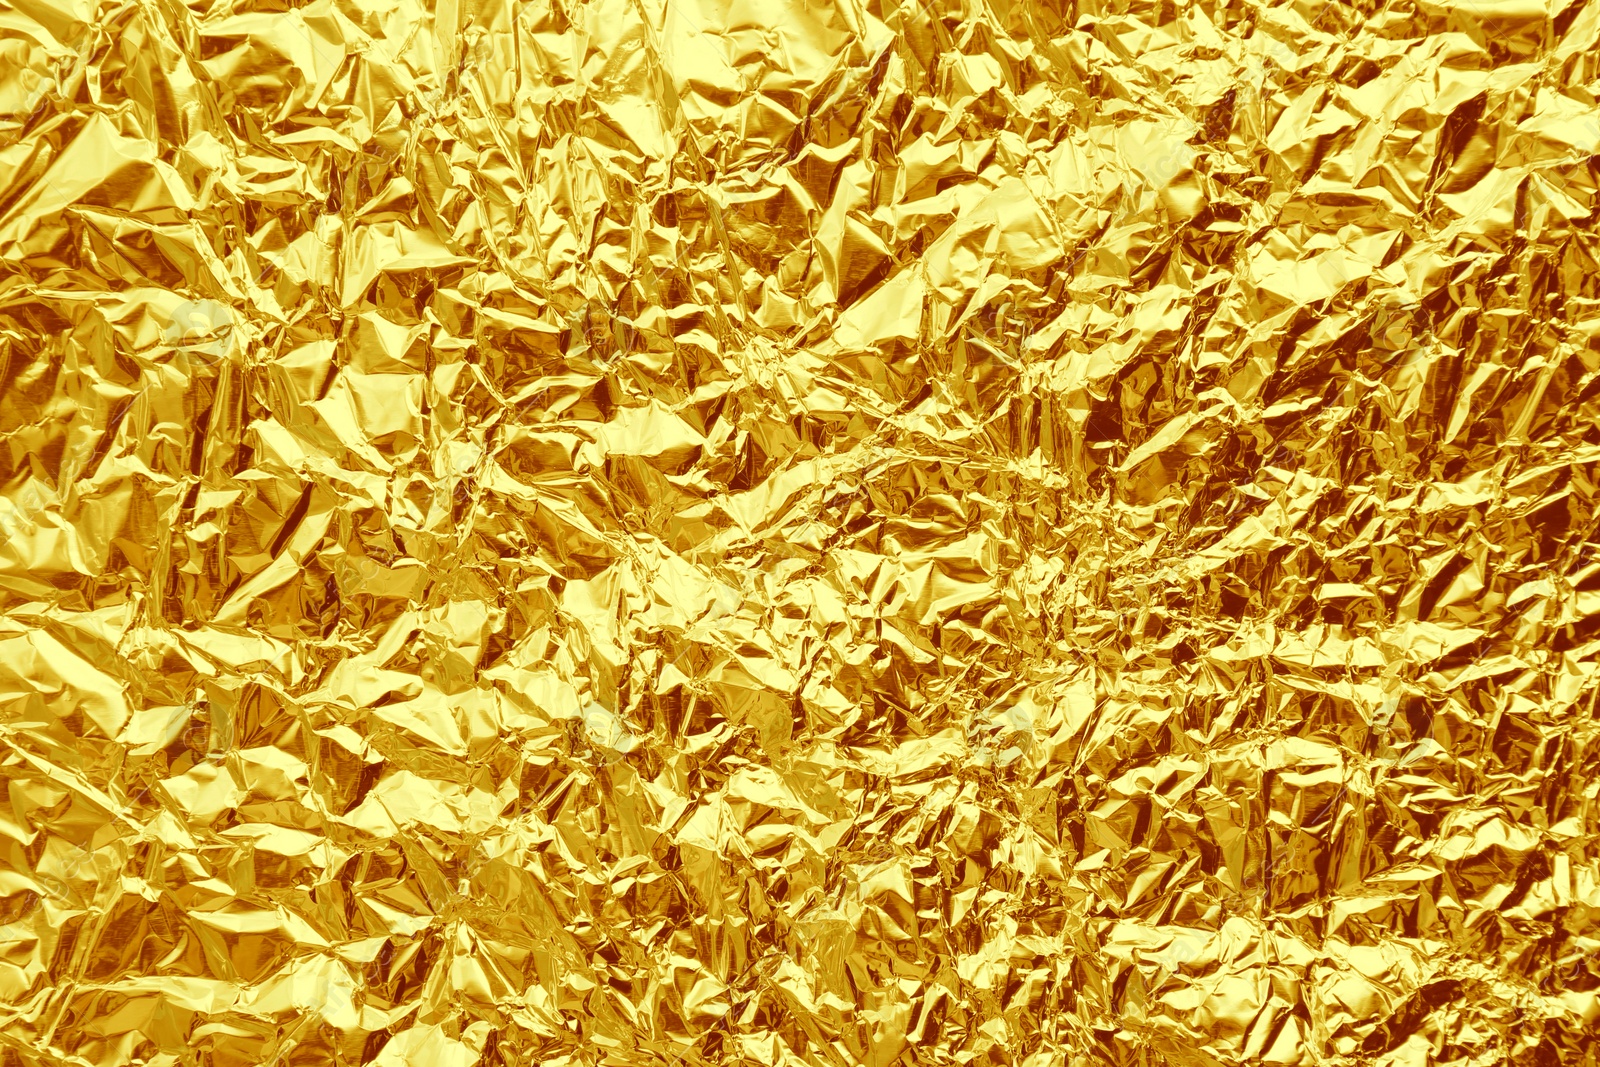 Image of Crumpled golden foil as background, closeup view